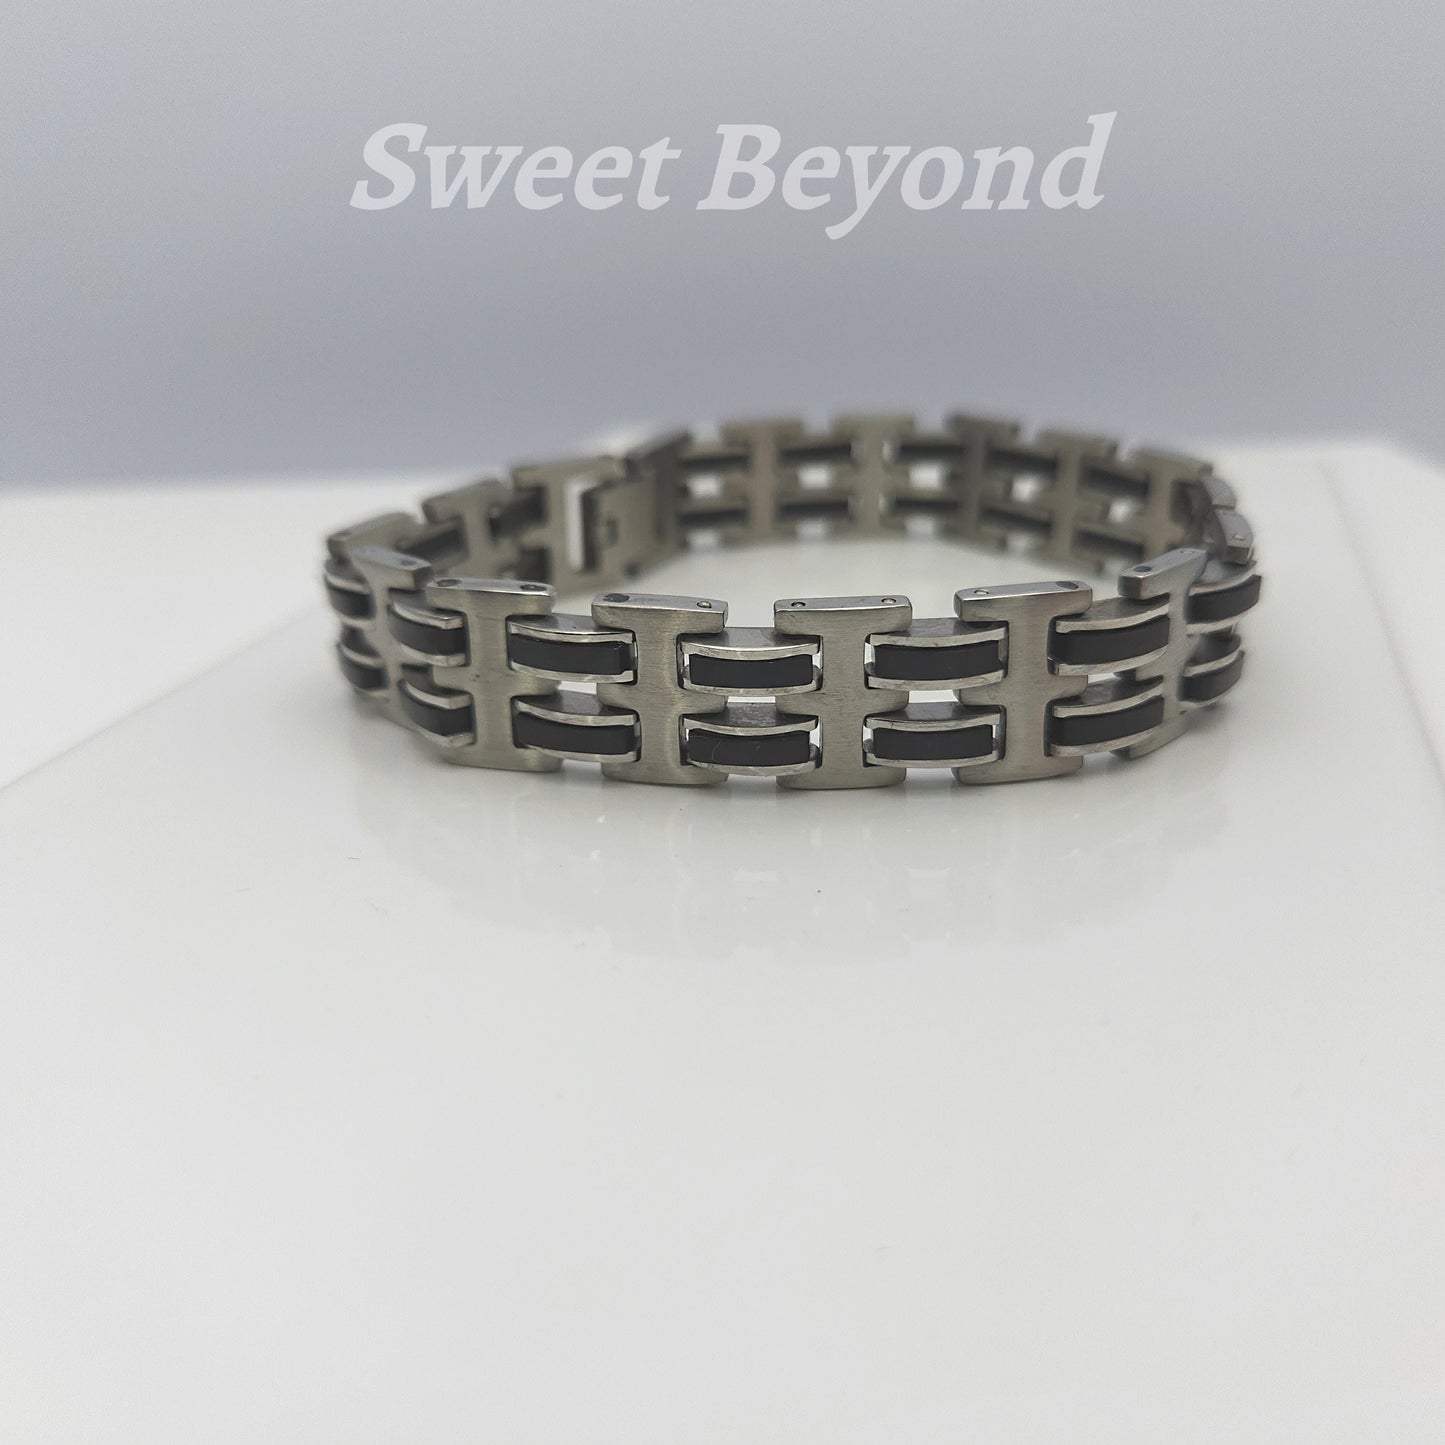 The Bold and Contemporary Bracelet